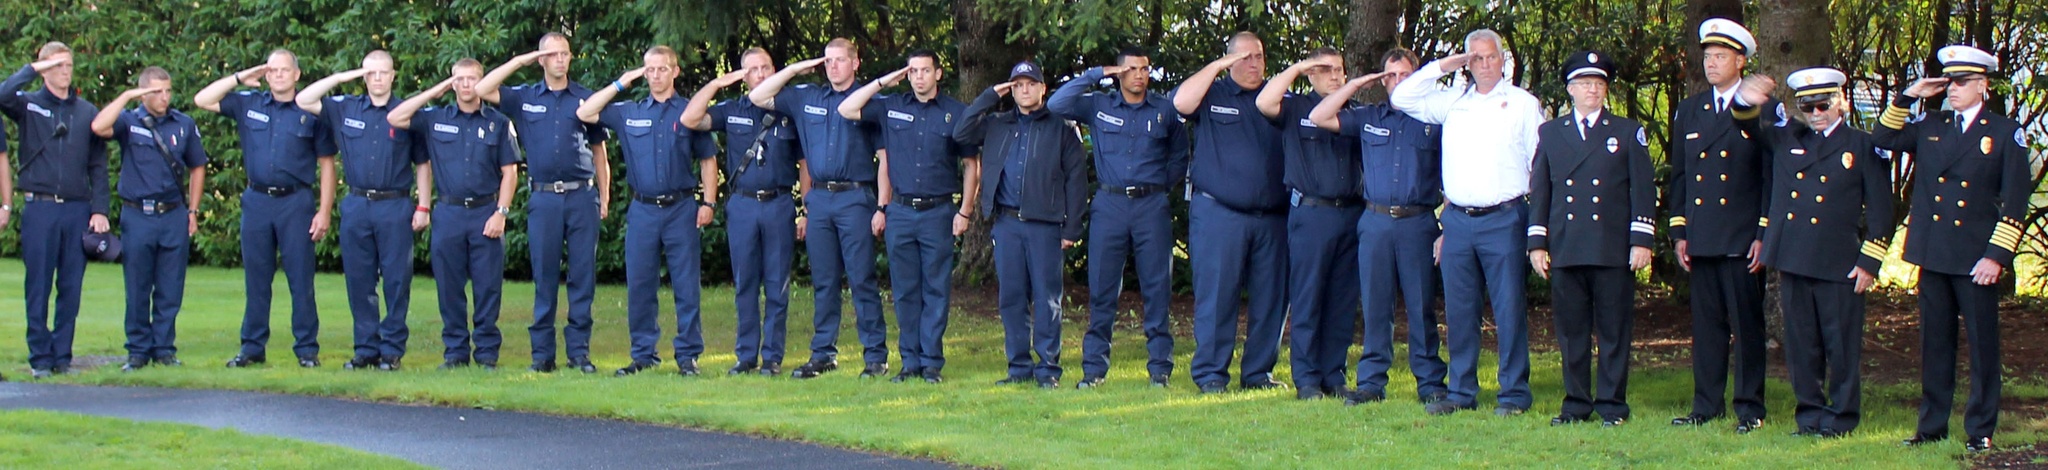 Courtesy PhotoMarysville firefighters and police officers salute the fallen during the 15th anniversary of the Sept. 11